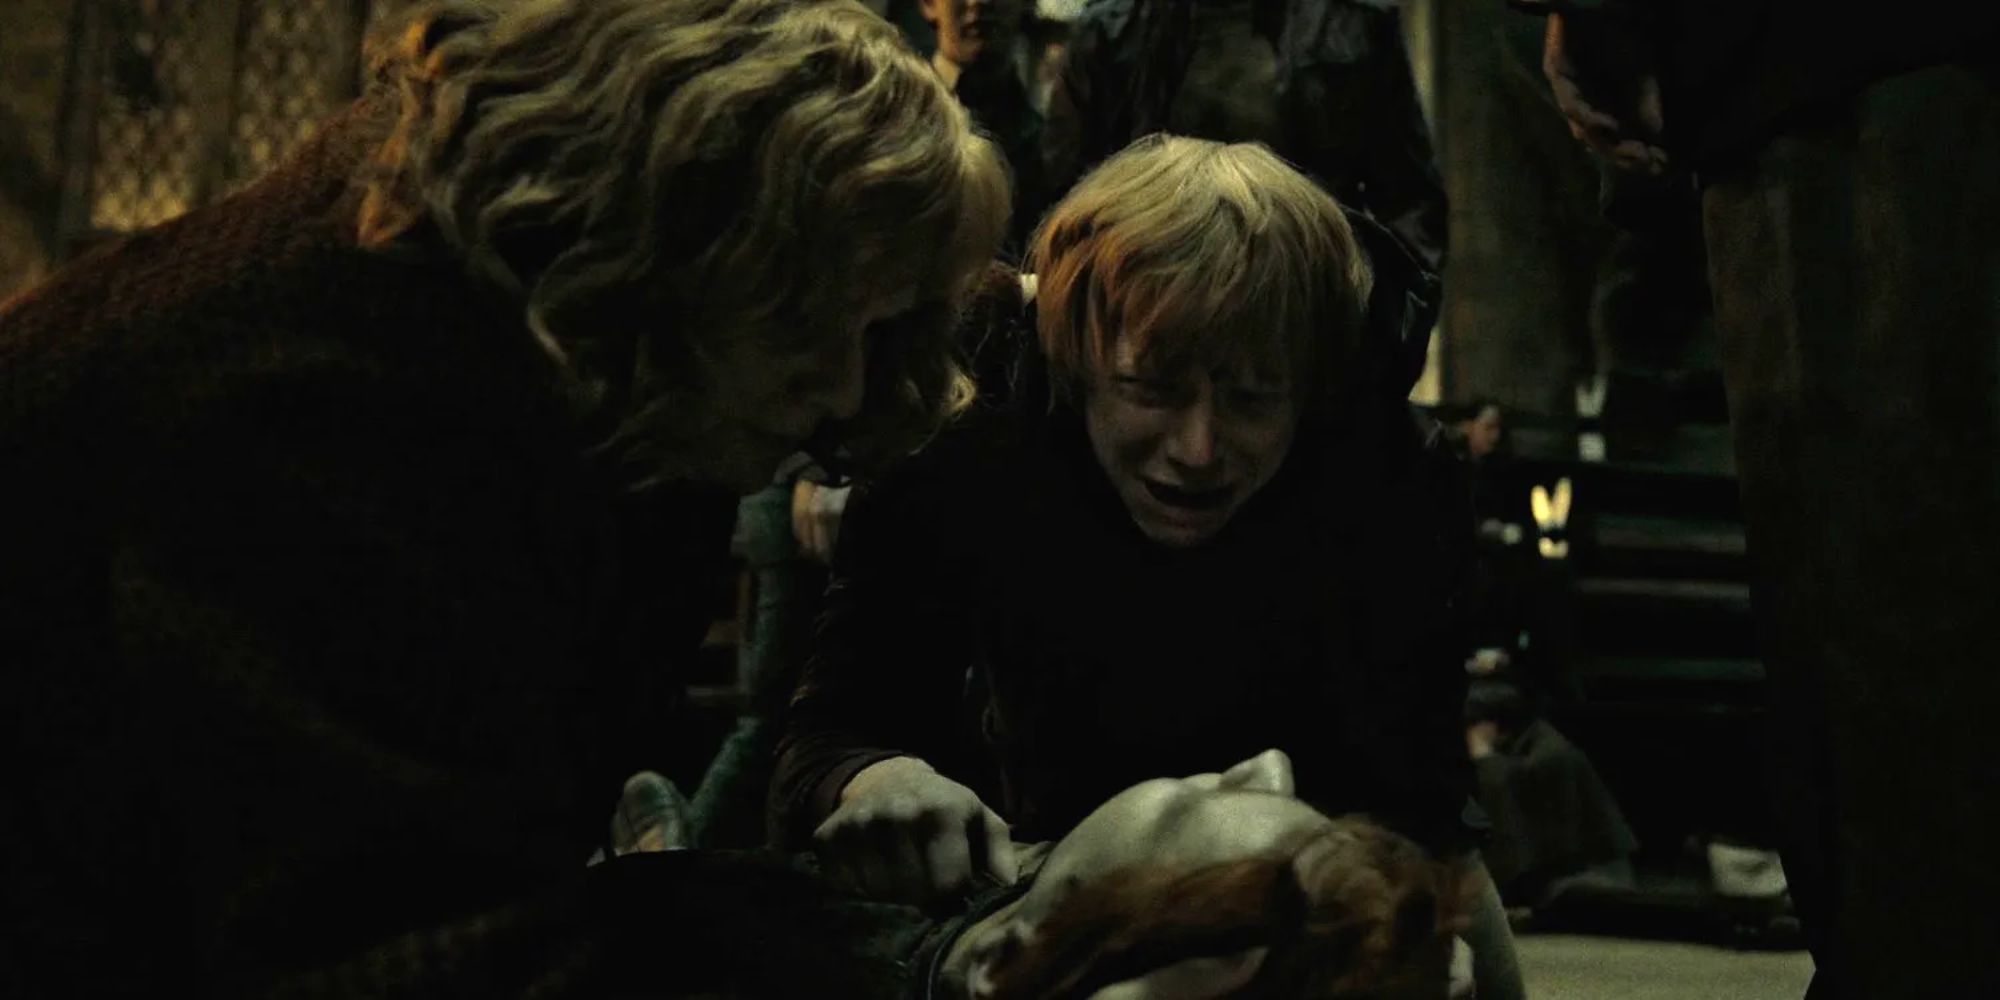 Fred Weasley lies dead on the ground as Ron and Molly Weasley cry over him